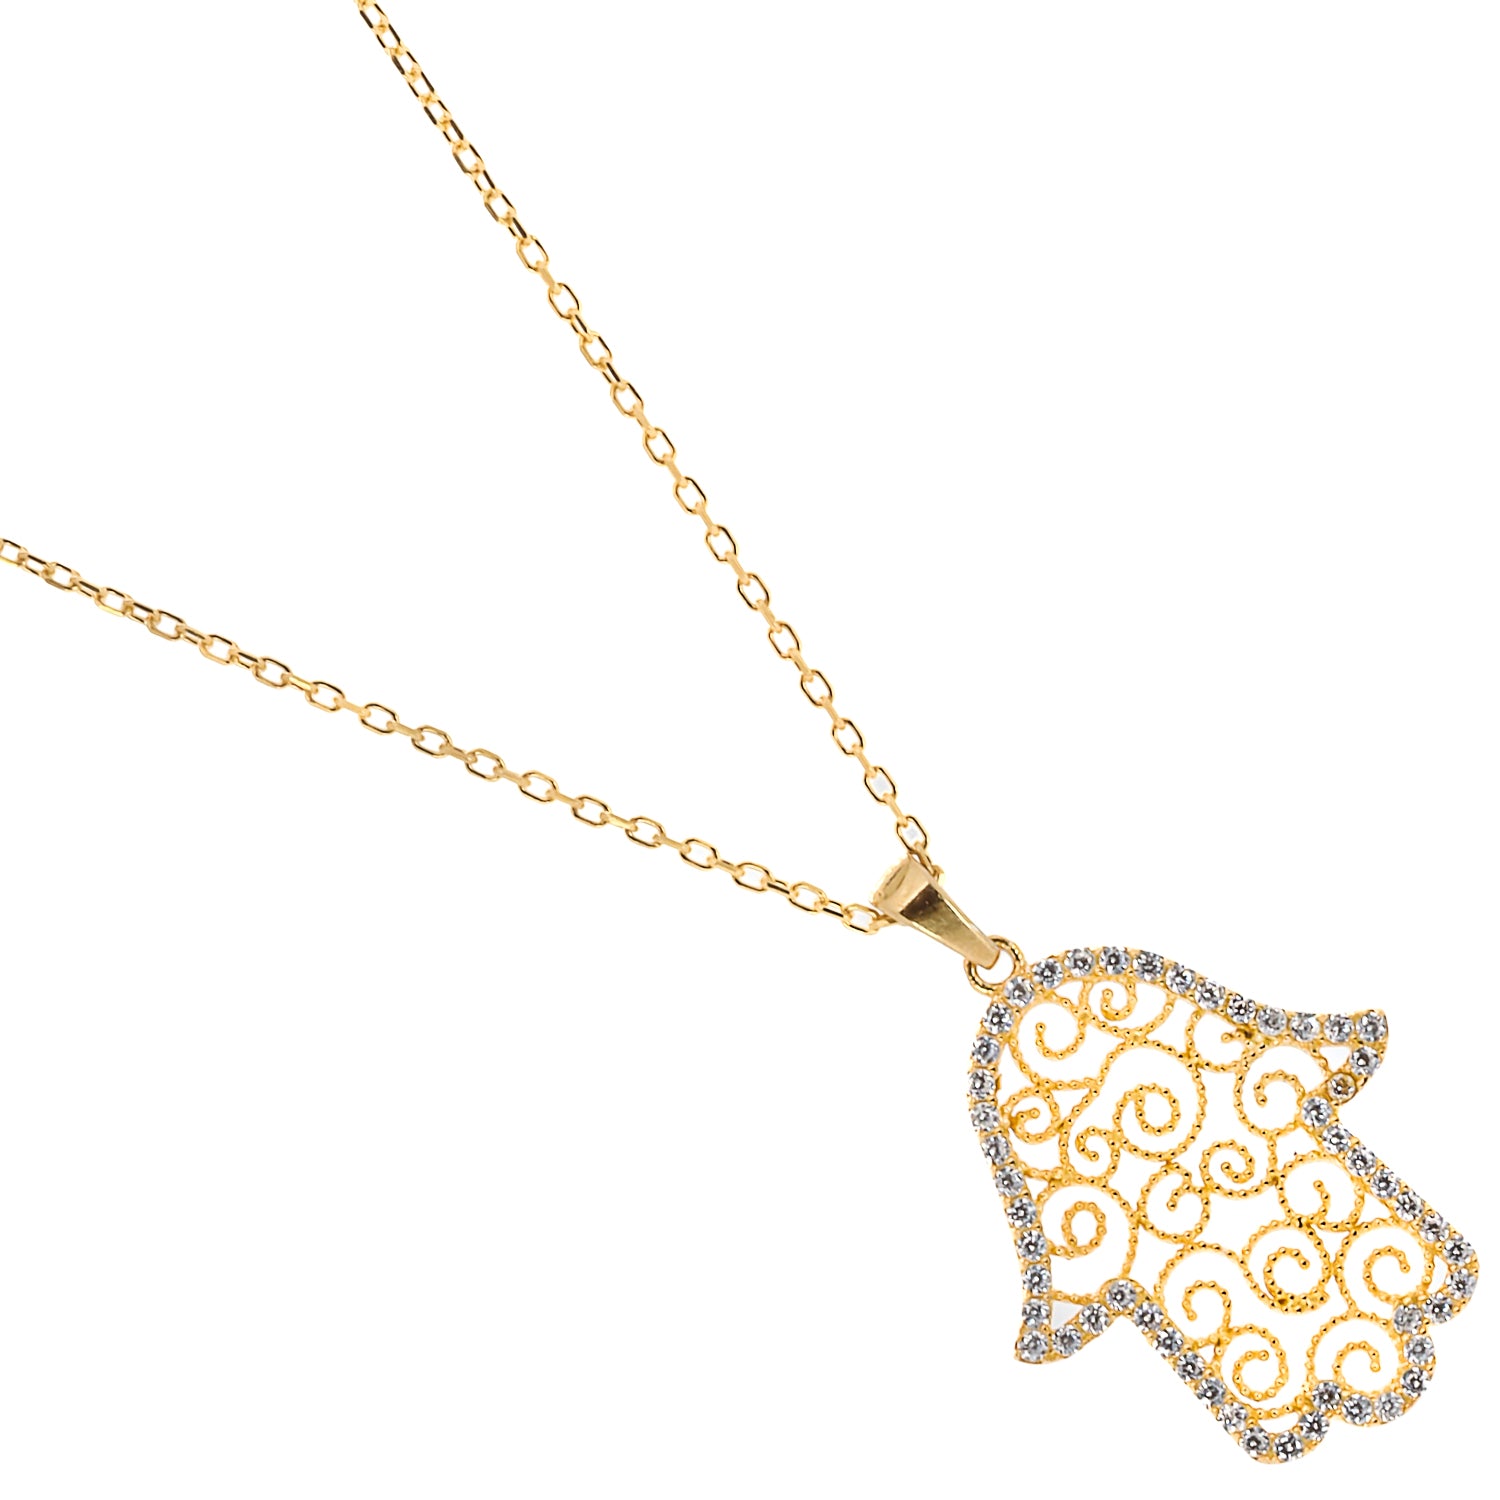 Gold Spiral Hamsa Necklace, a meaningful and stylish accessory that combines the protective symbolism of the Hamsa with the beauty of CZ diamonds.